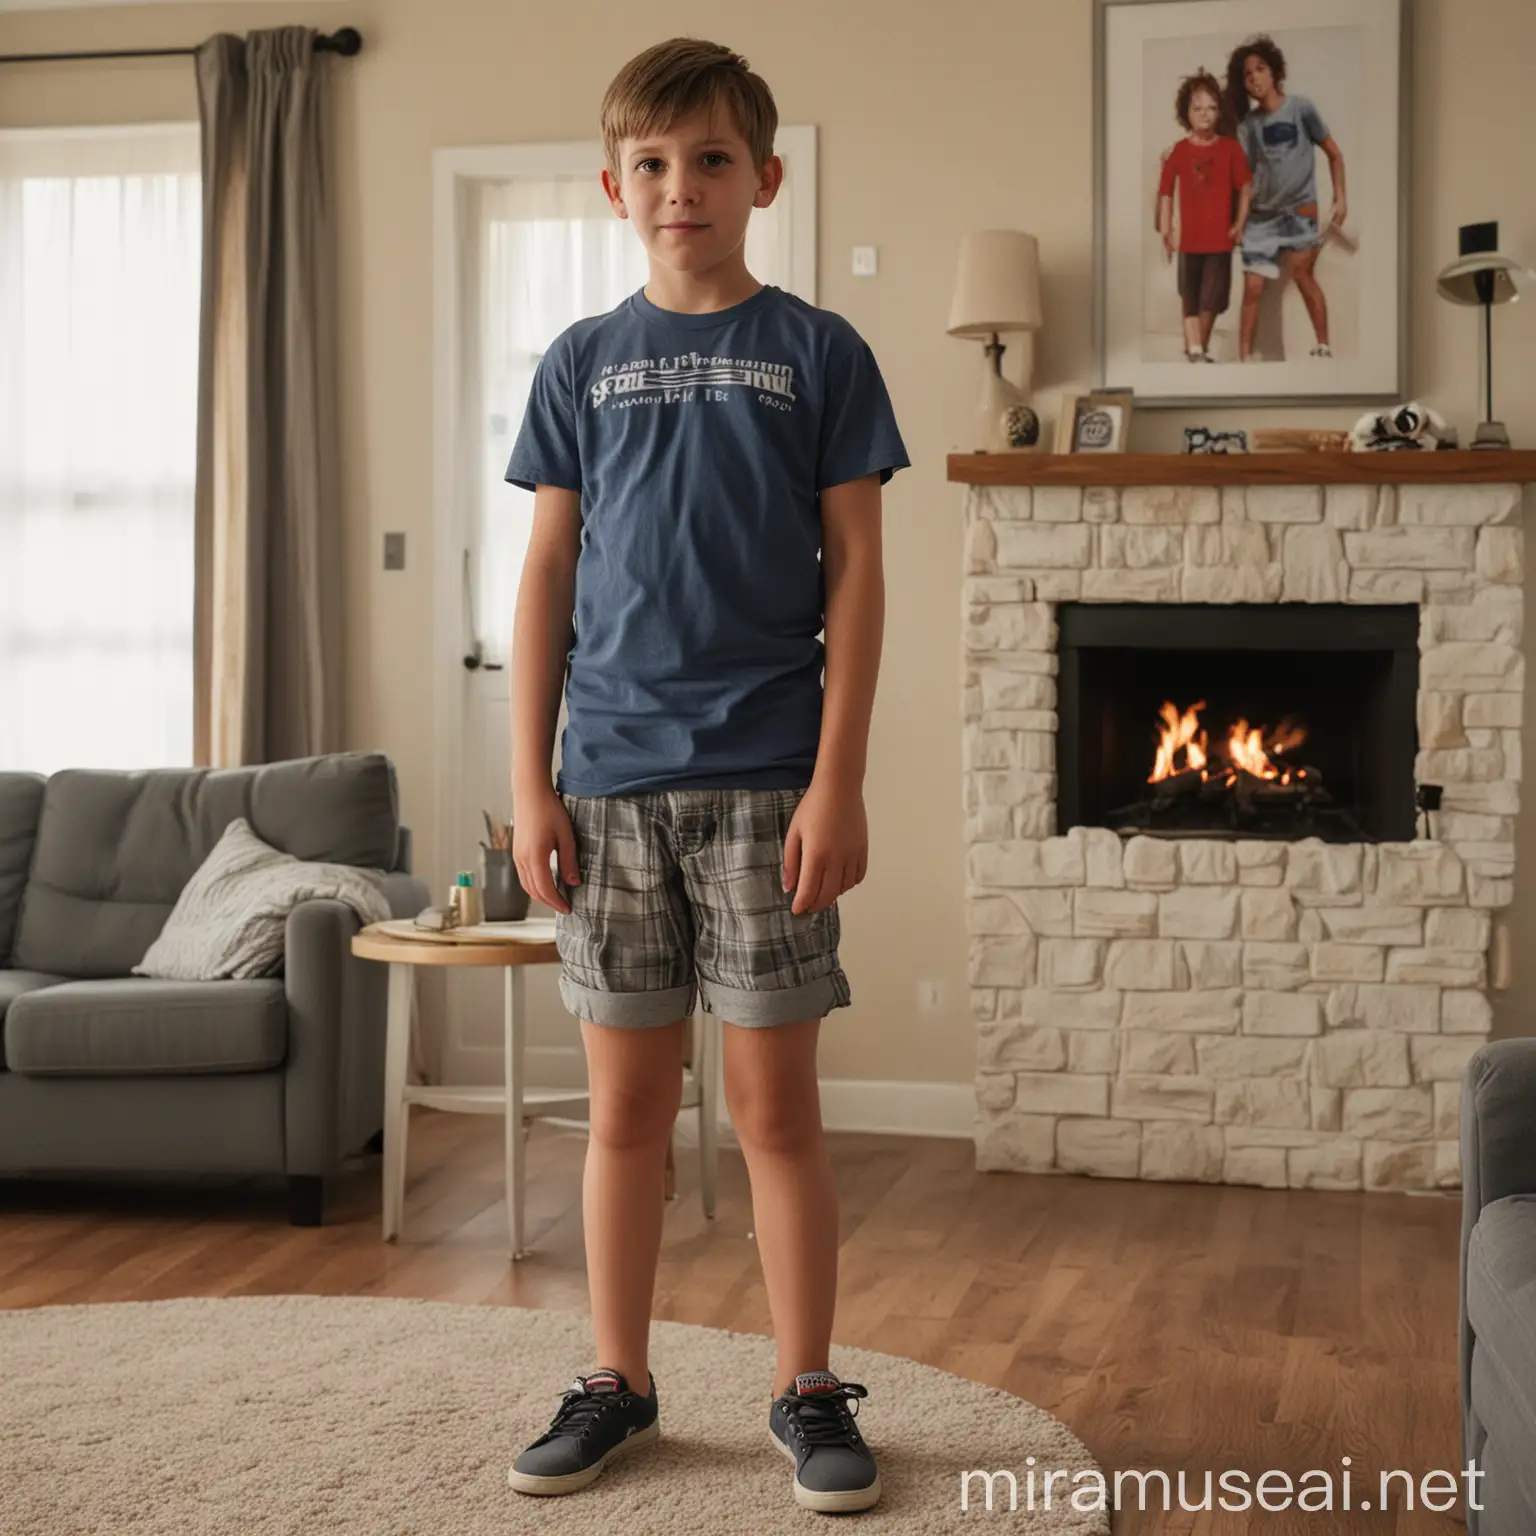 Boy in Casual Attire Standing in Living Room